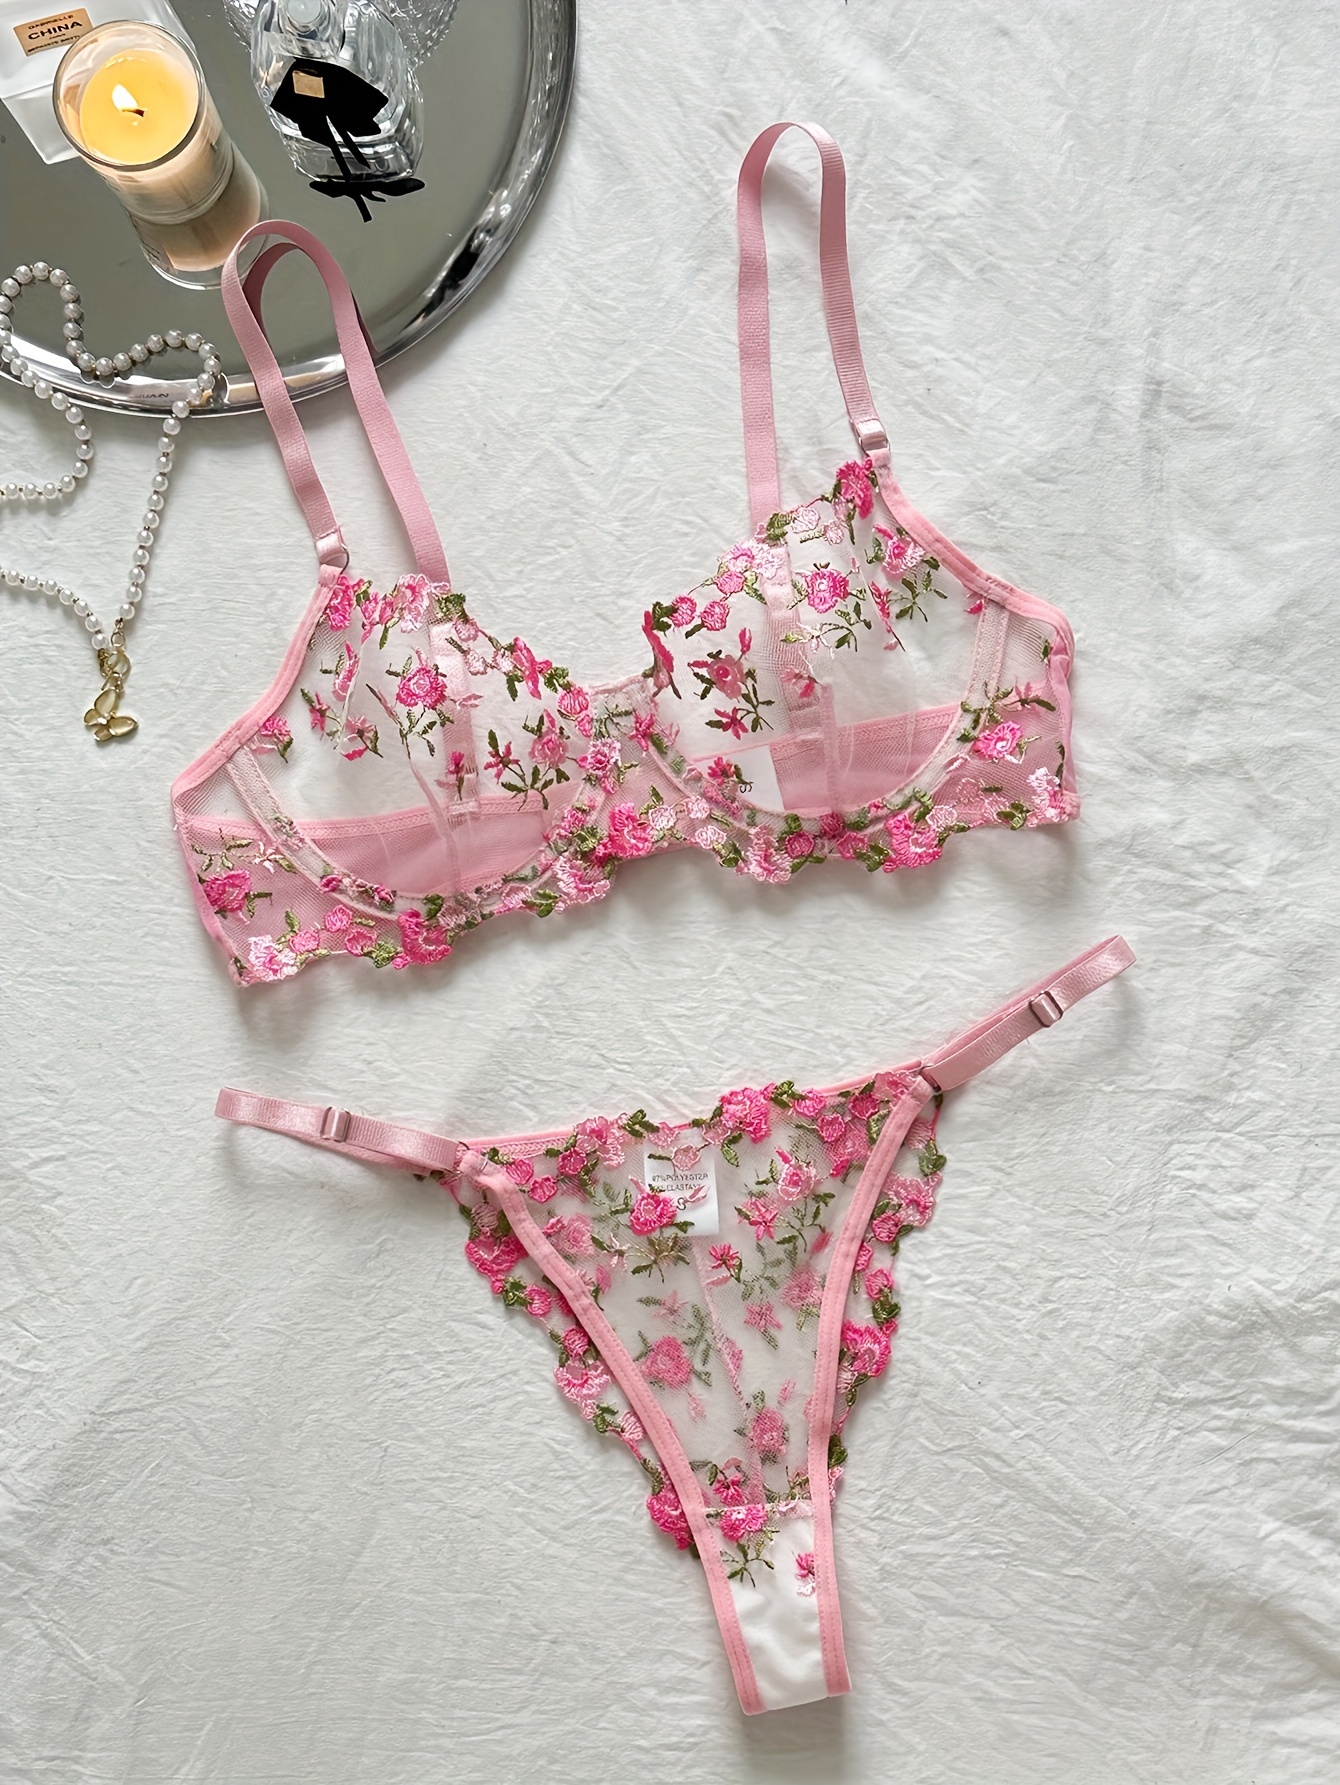 Shan's Lingerie & Leisurewear - The Embroidered Minimiser bra is